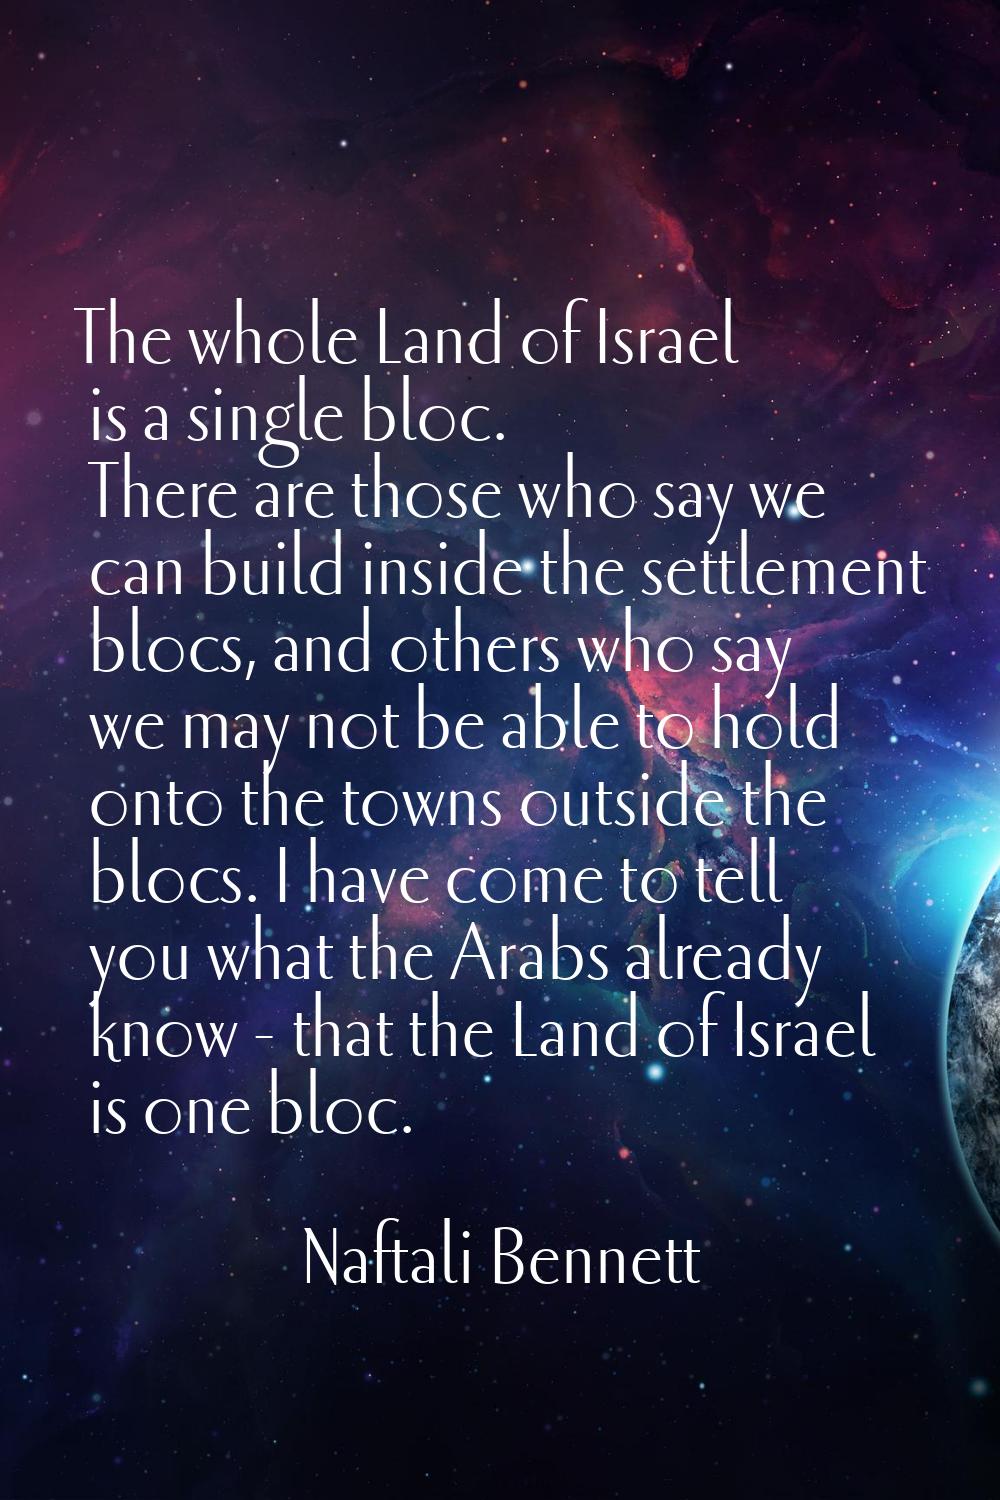 The whole Land of Israel is a single bloc. There are those who say we can build inside the settleme